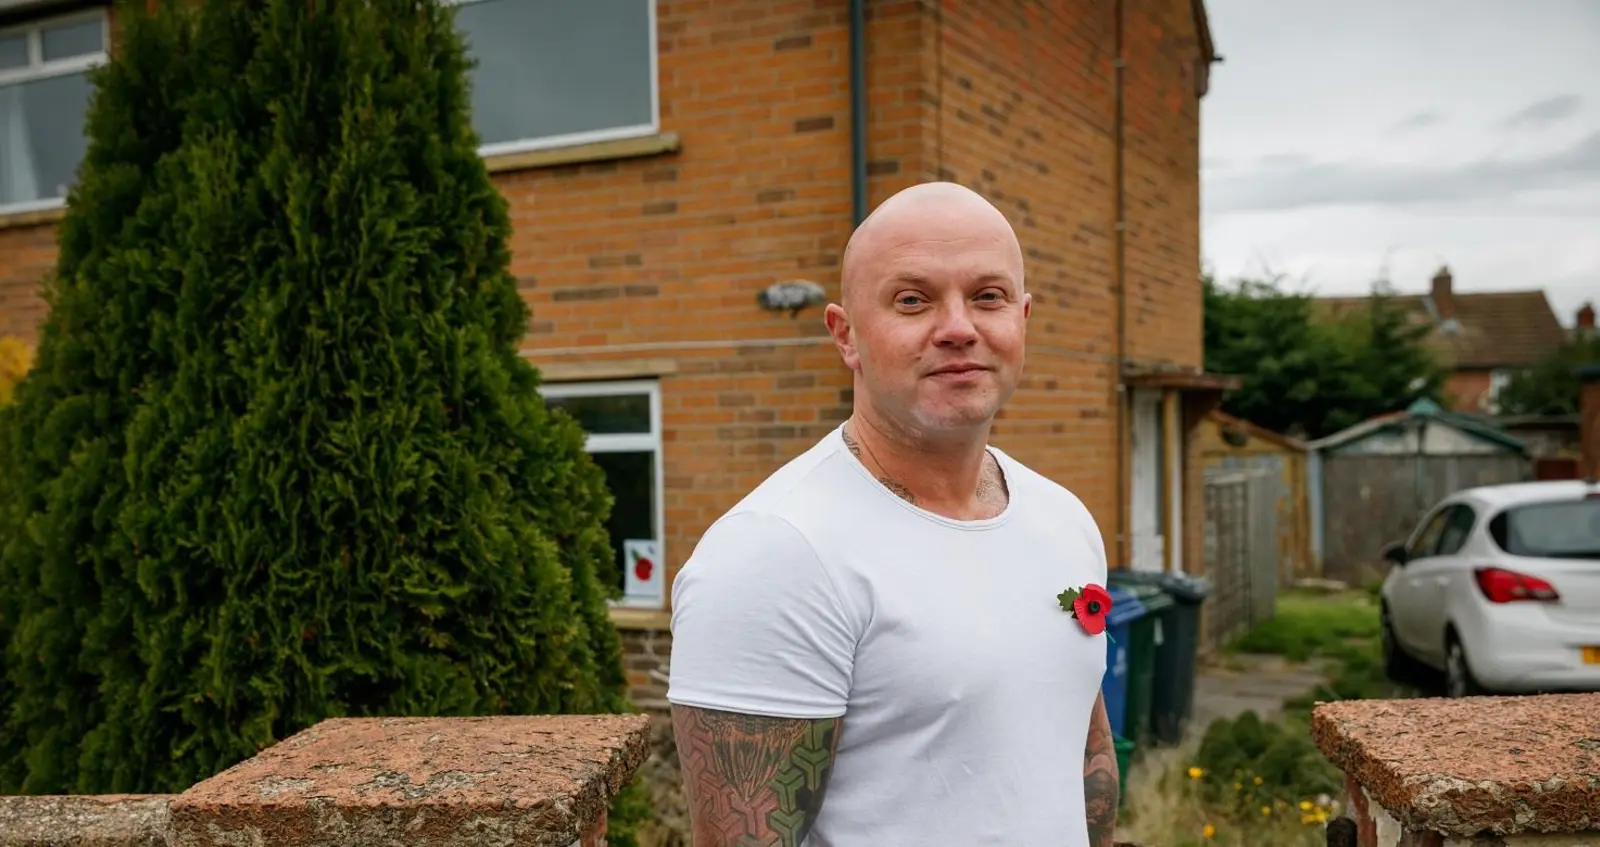 Lawrence Philips wearing a poppy outside his home